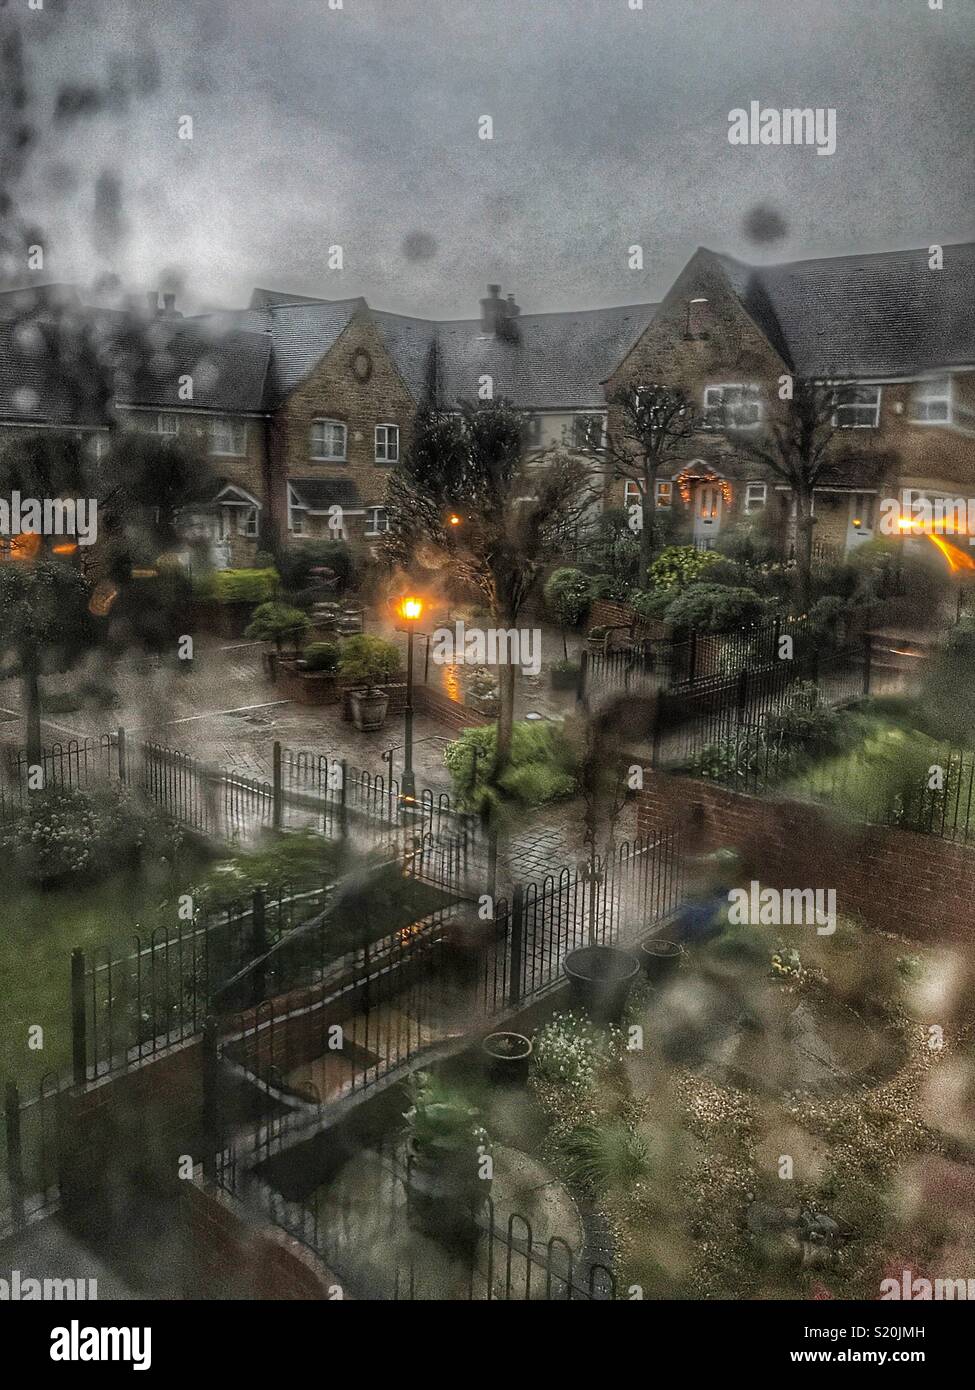 Looking out of a window covered with raindrops, residential area with lights in the early evening Stock Photo